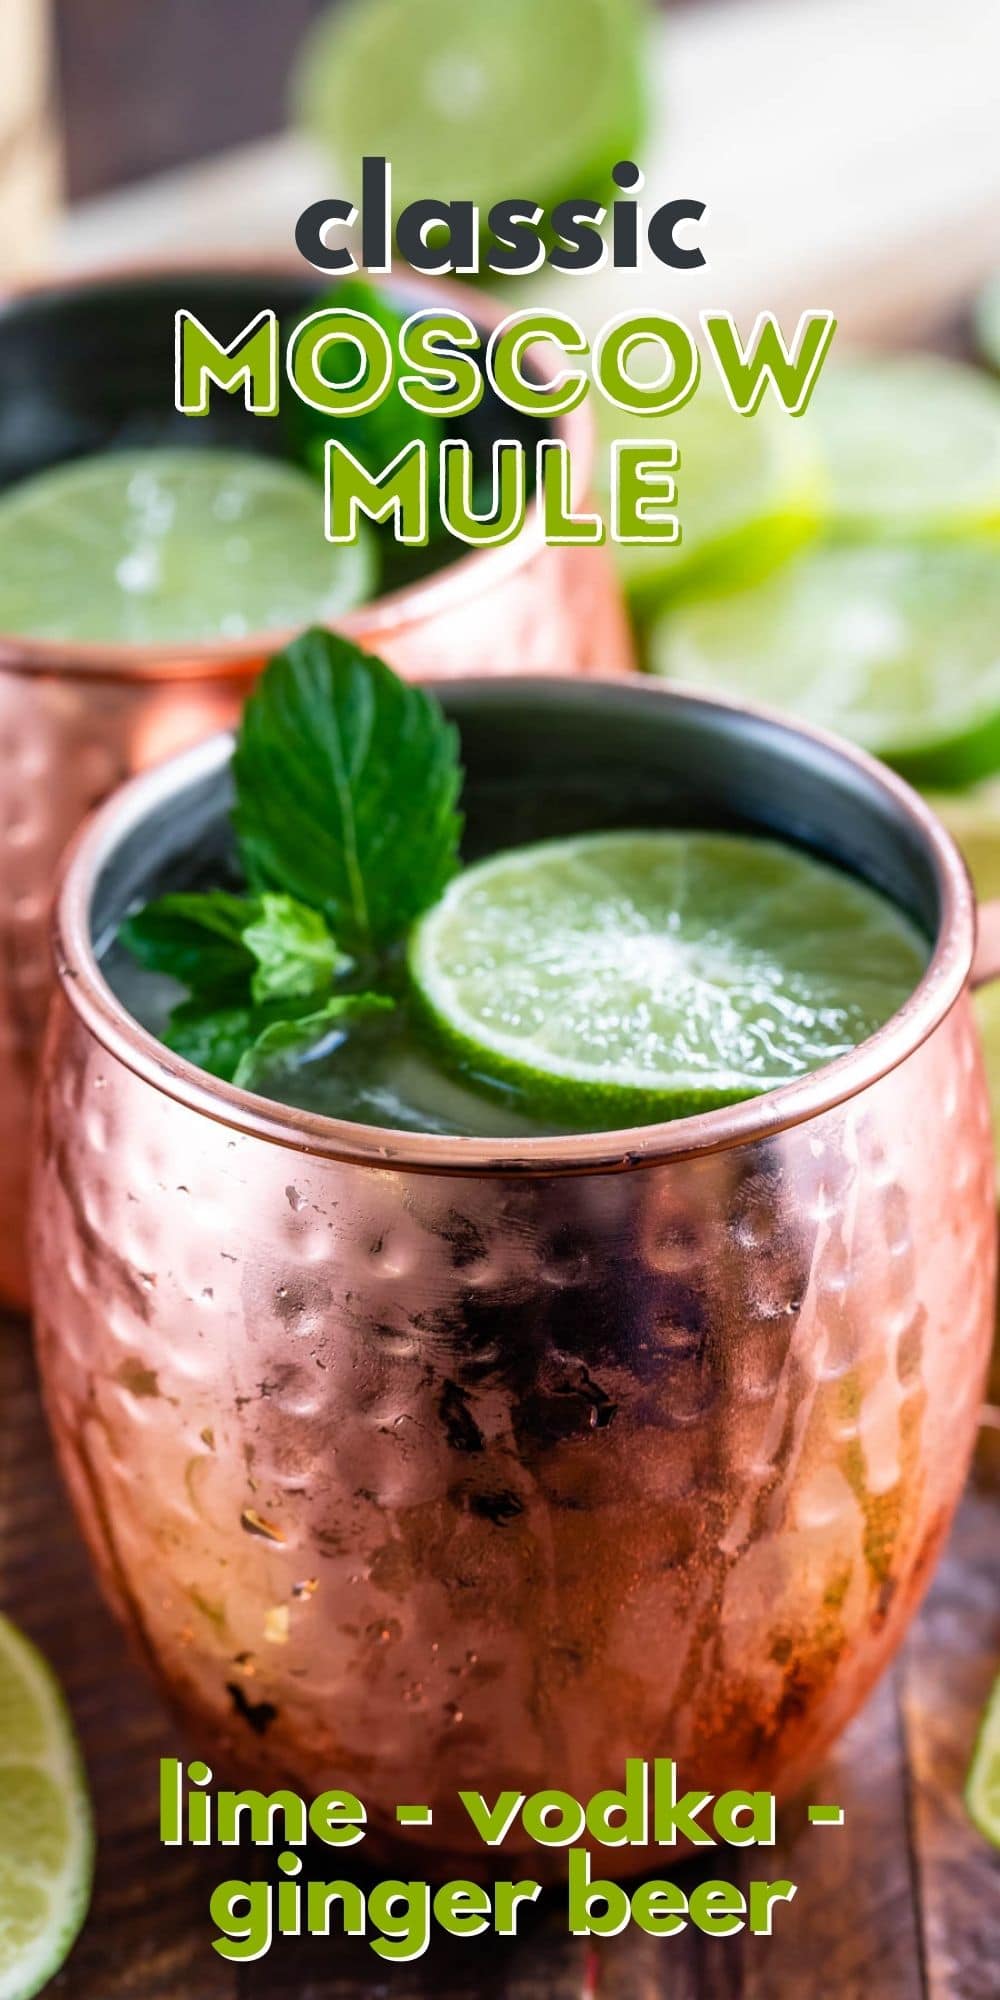 Classic moscow mule in copper mug topped with mint leaves and a lime slice with recipe title on top of image